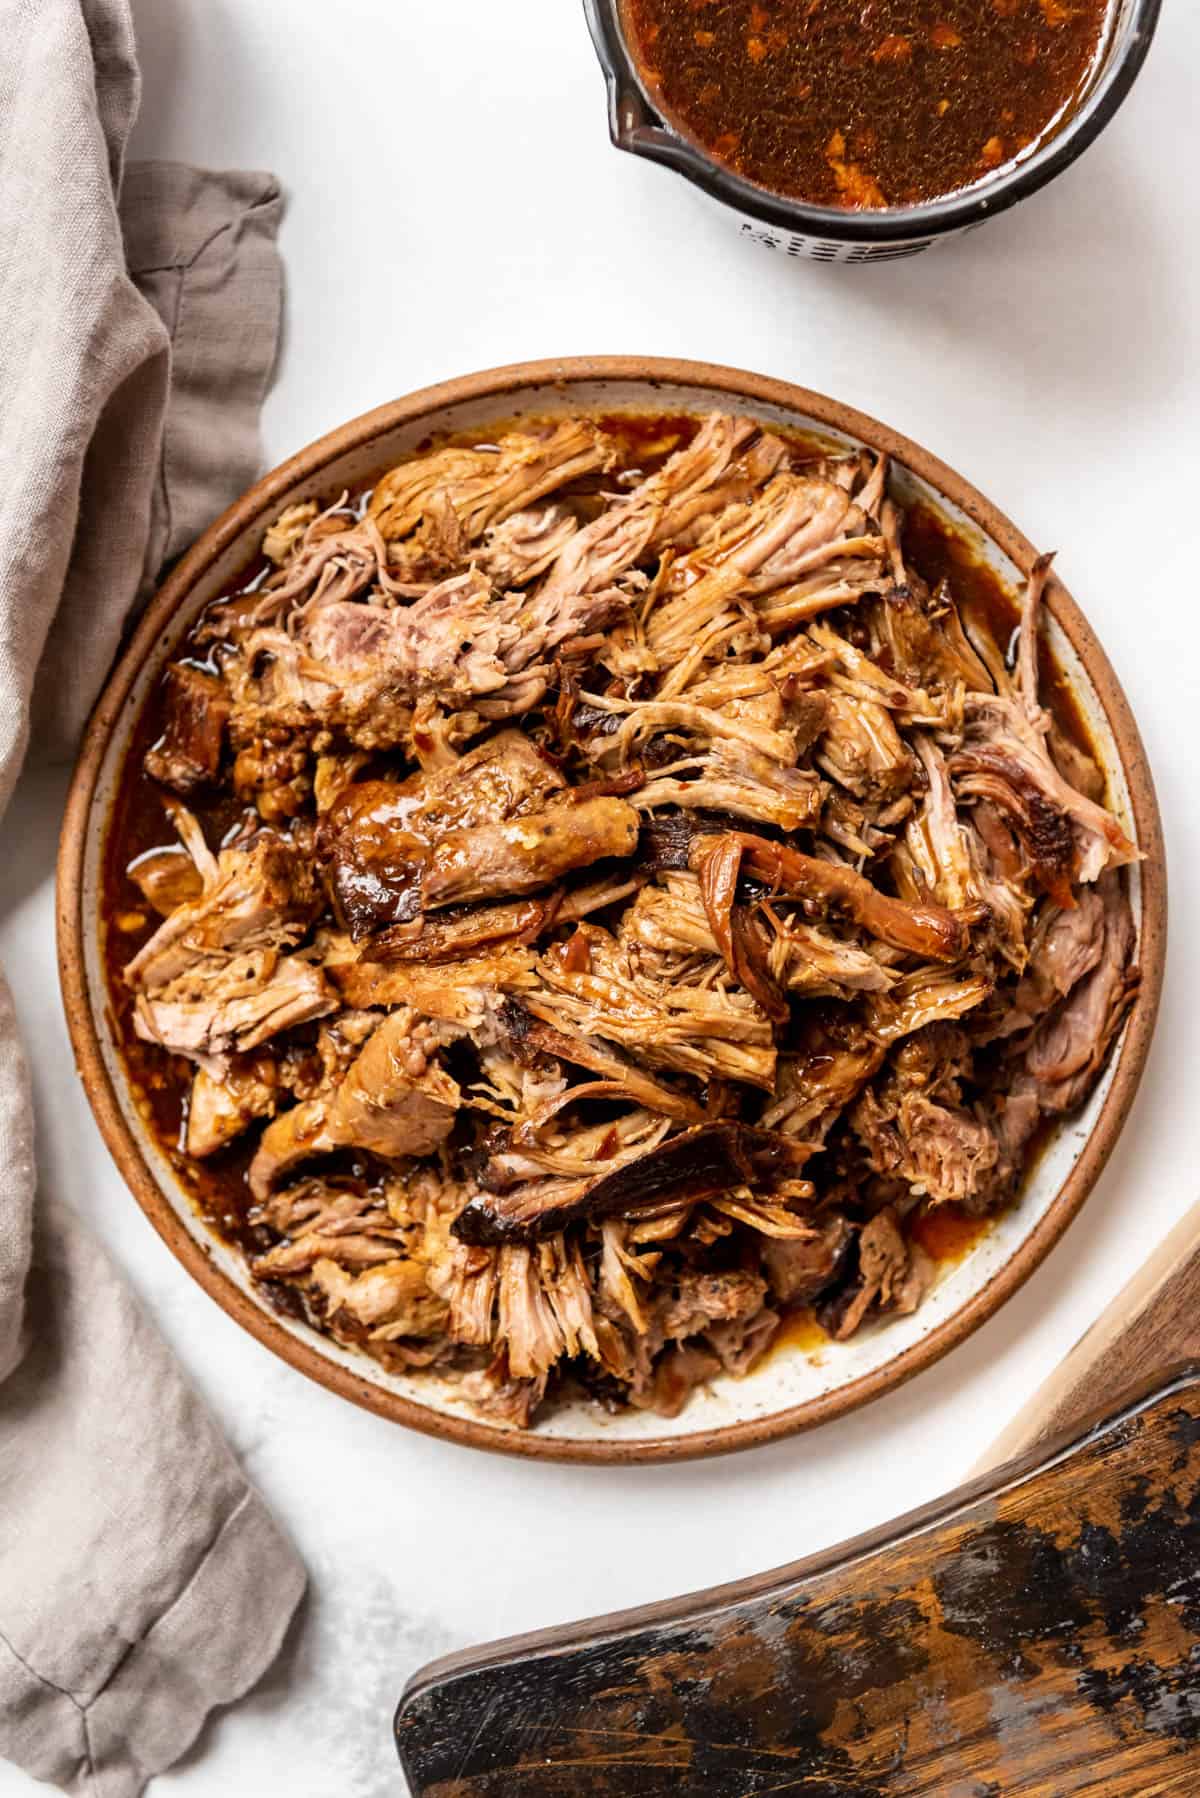 A plate full of Instant Pot pork roast that has been shredded and drizzled with glaze.